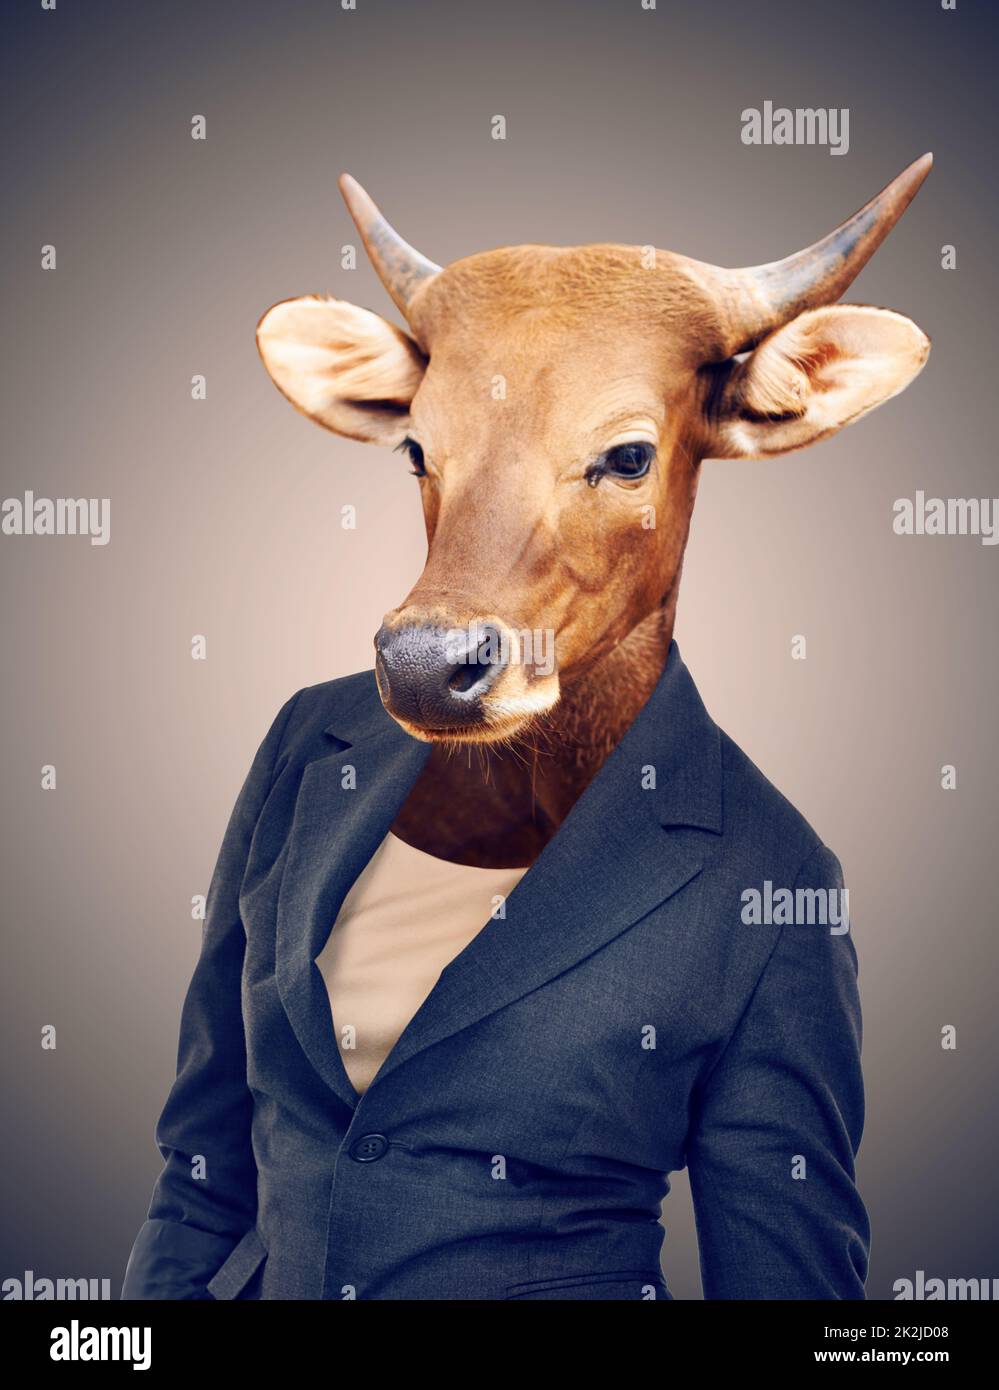 Welcome to the corporate jungle. Conceptual image of animal heads on business people. Stock Photo